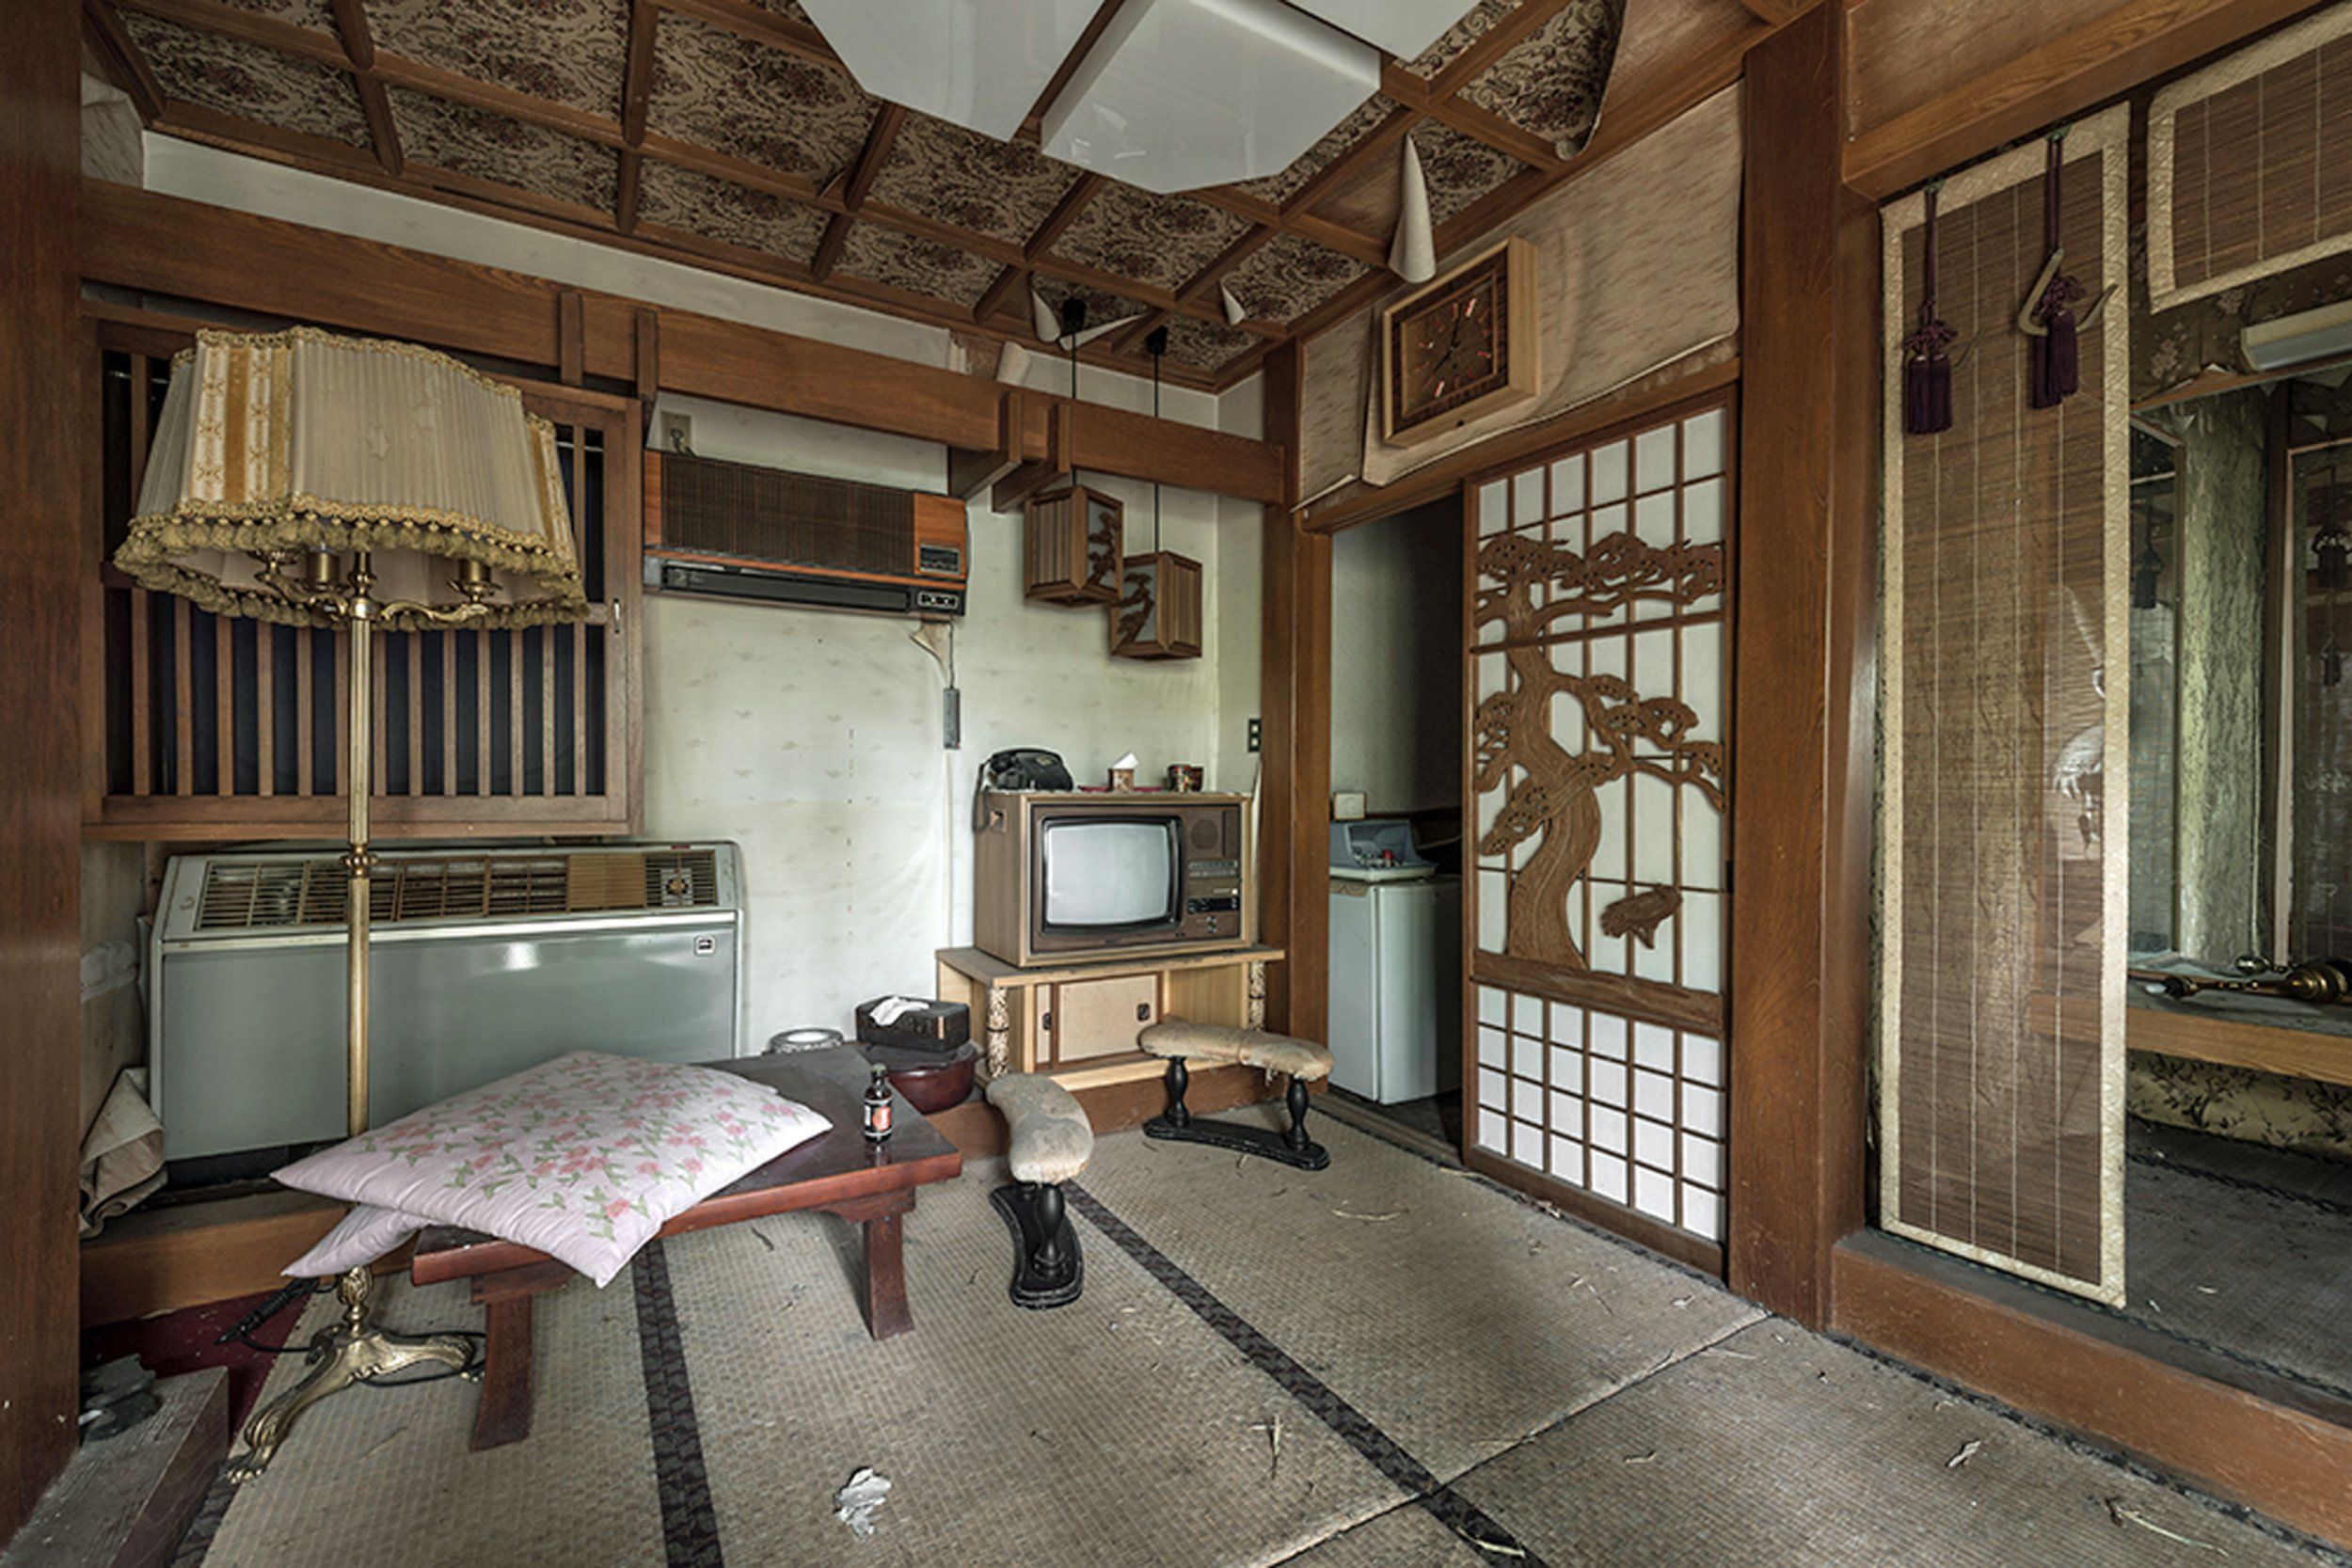 Pictured, a room modeled to look like a traditional Japanese Roykan. The style is characterised by straw mats, panelling, and low tables. A Roykan is a 17th century inn, where travellers could stop for the night and rest.